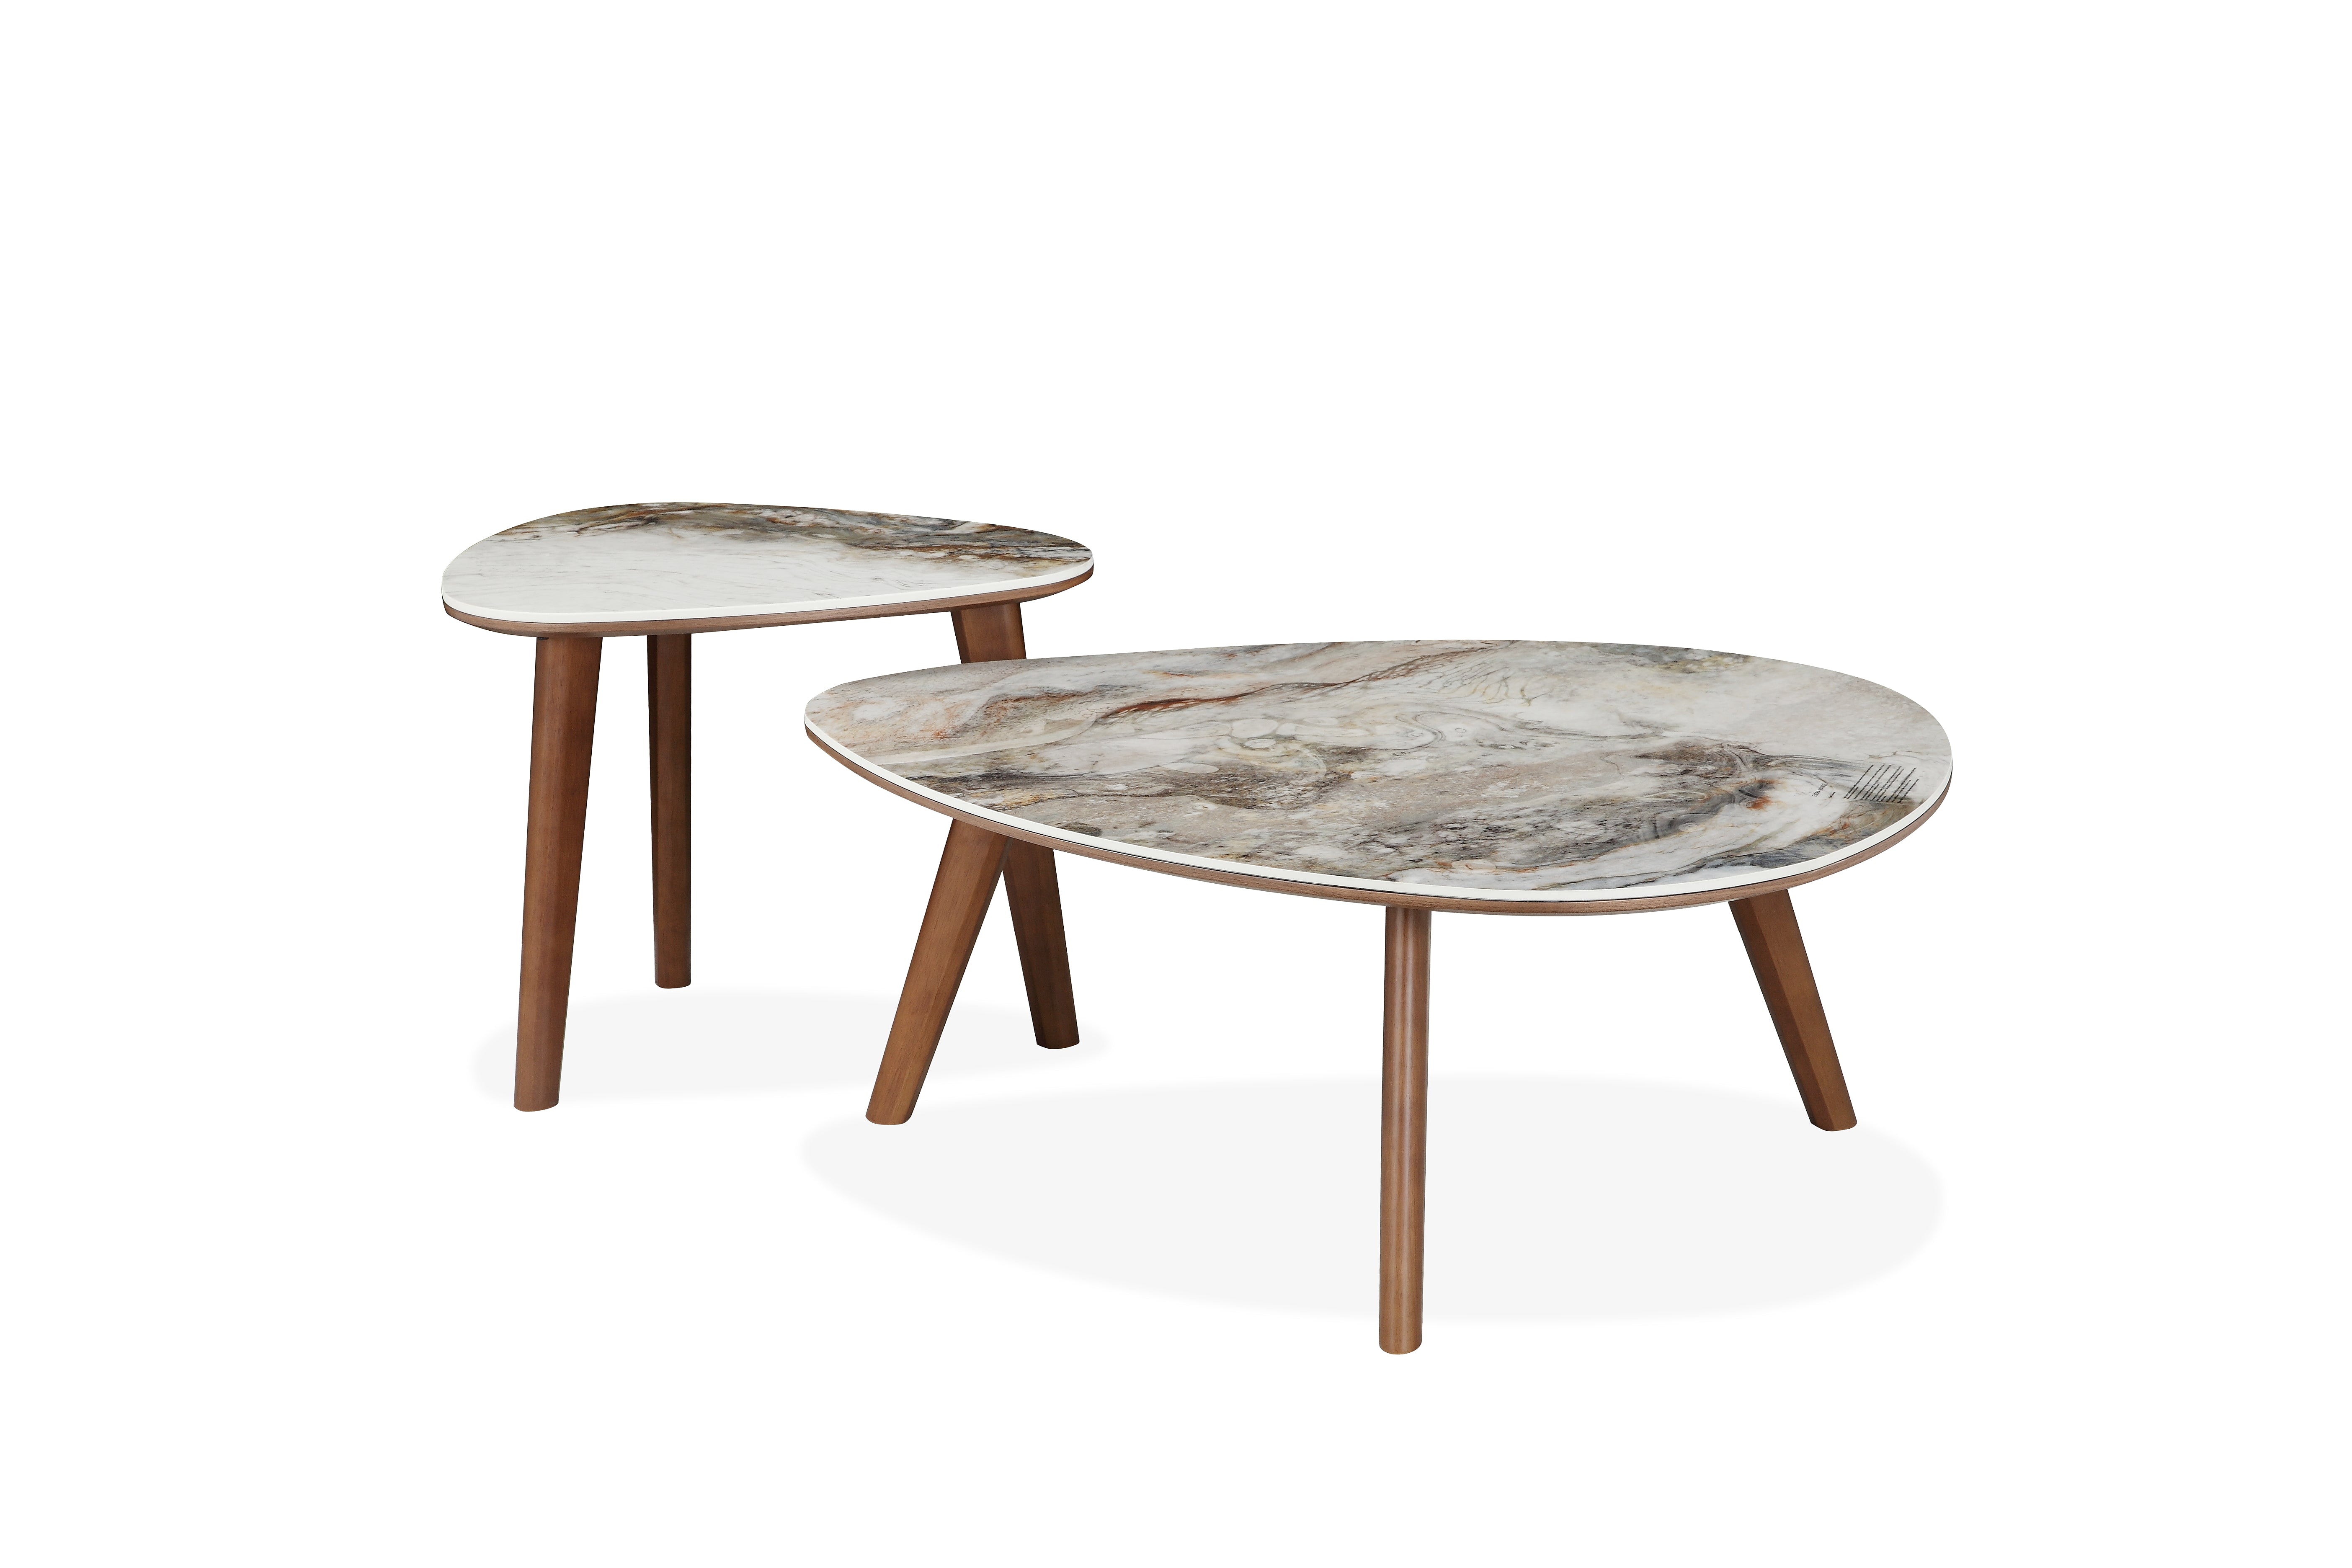 Elora: Luxury Anise Ceramic Dining Setting with Occasional Pieces